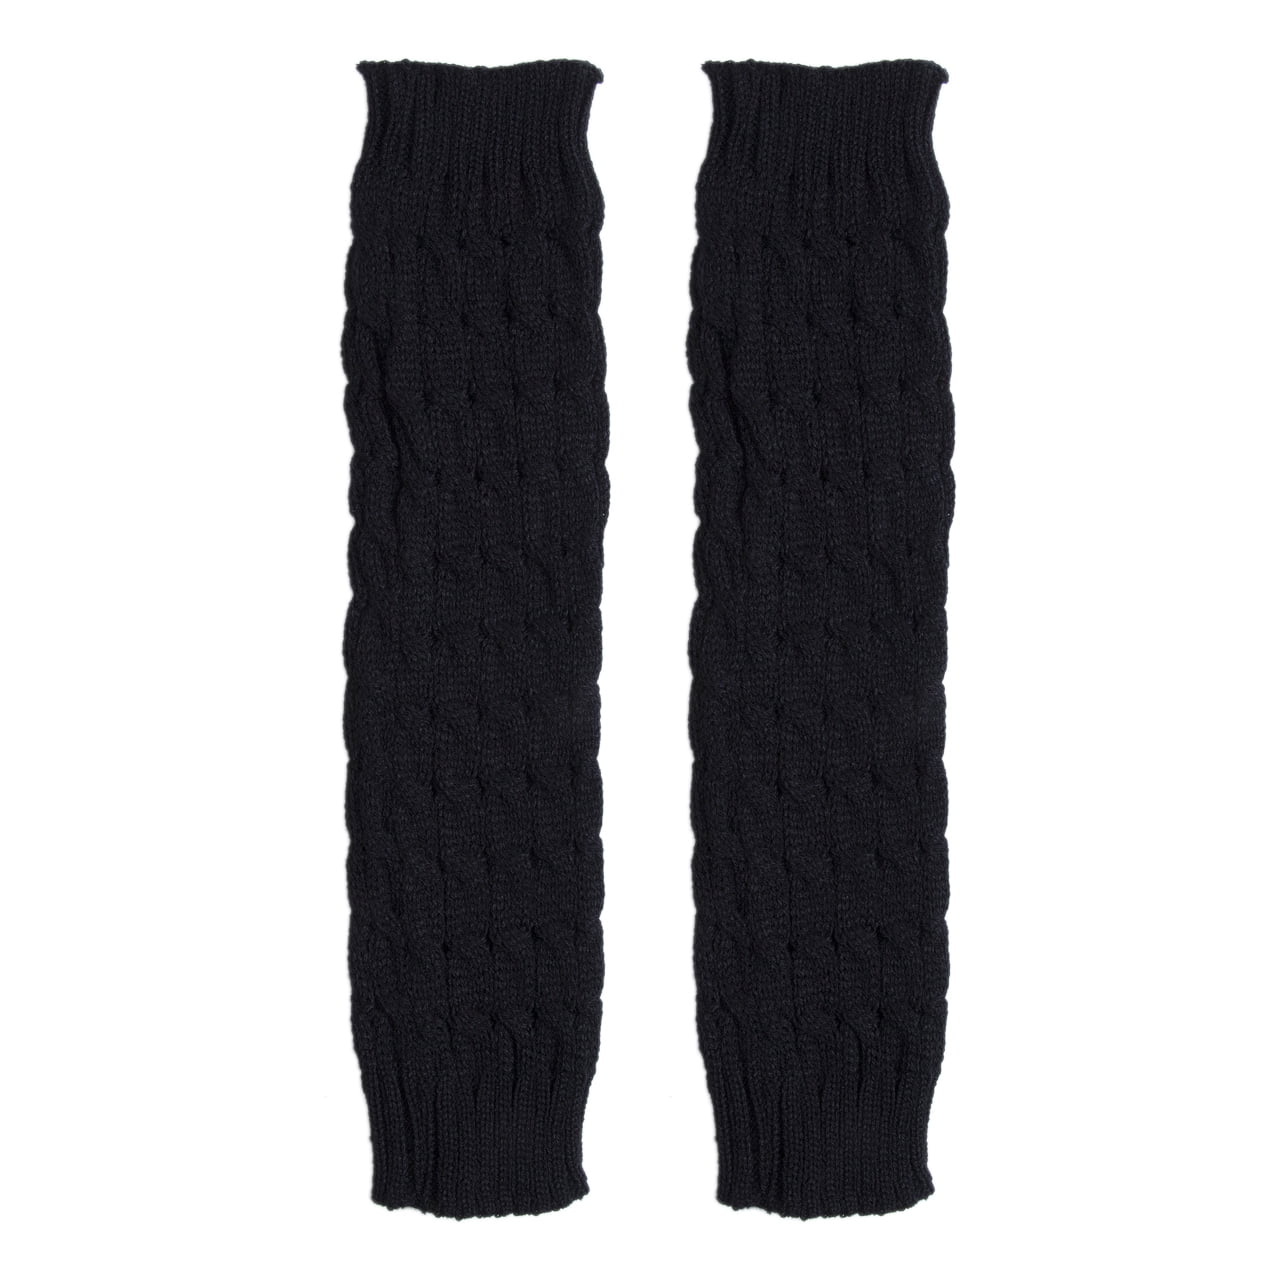 Huyghdfb Women Knit Leg Warmers Autumn Winter Solid Color Thermal Knee ...